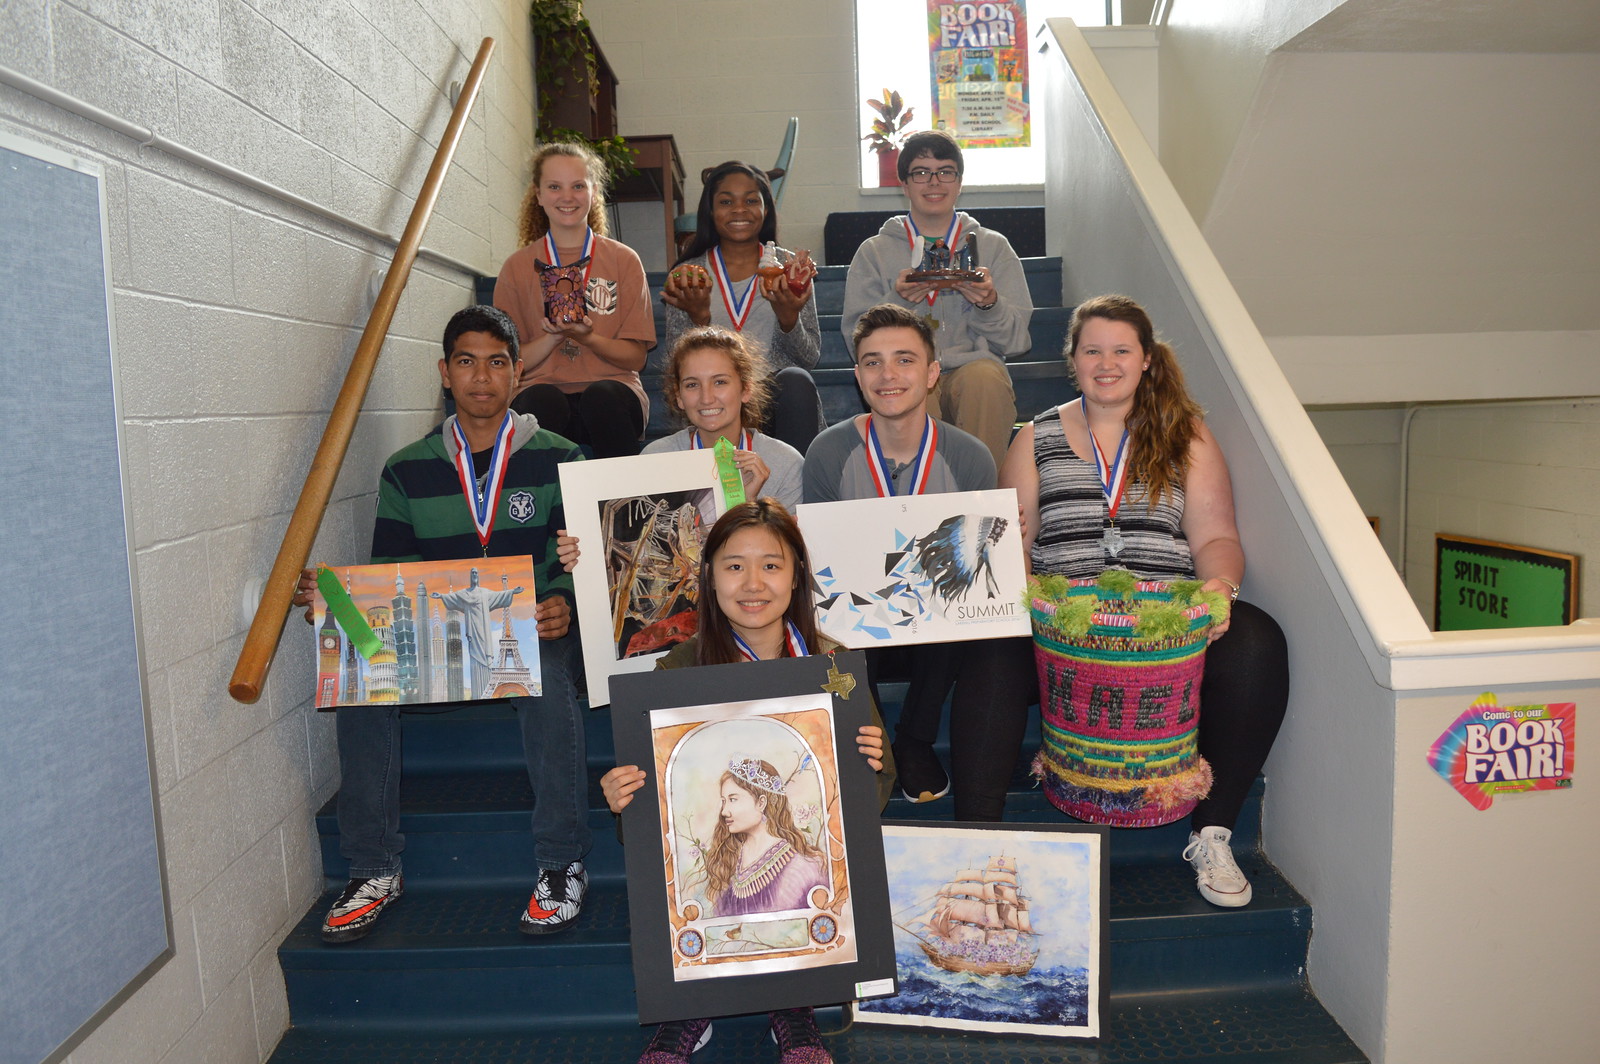 The artistic students at Lakehill Preparatory School took second place overall in the TAPPS State Art Competition.